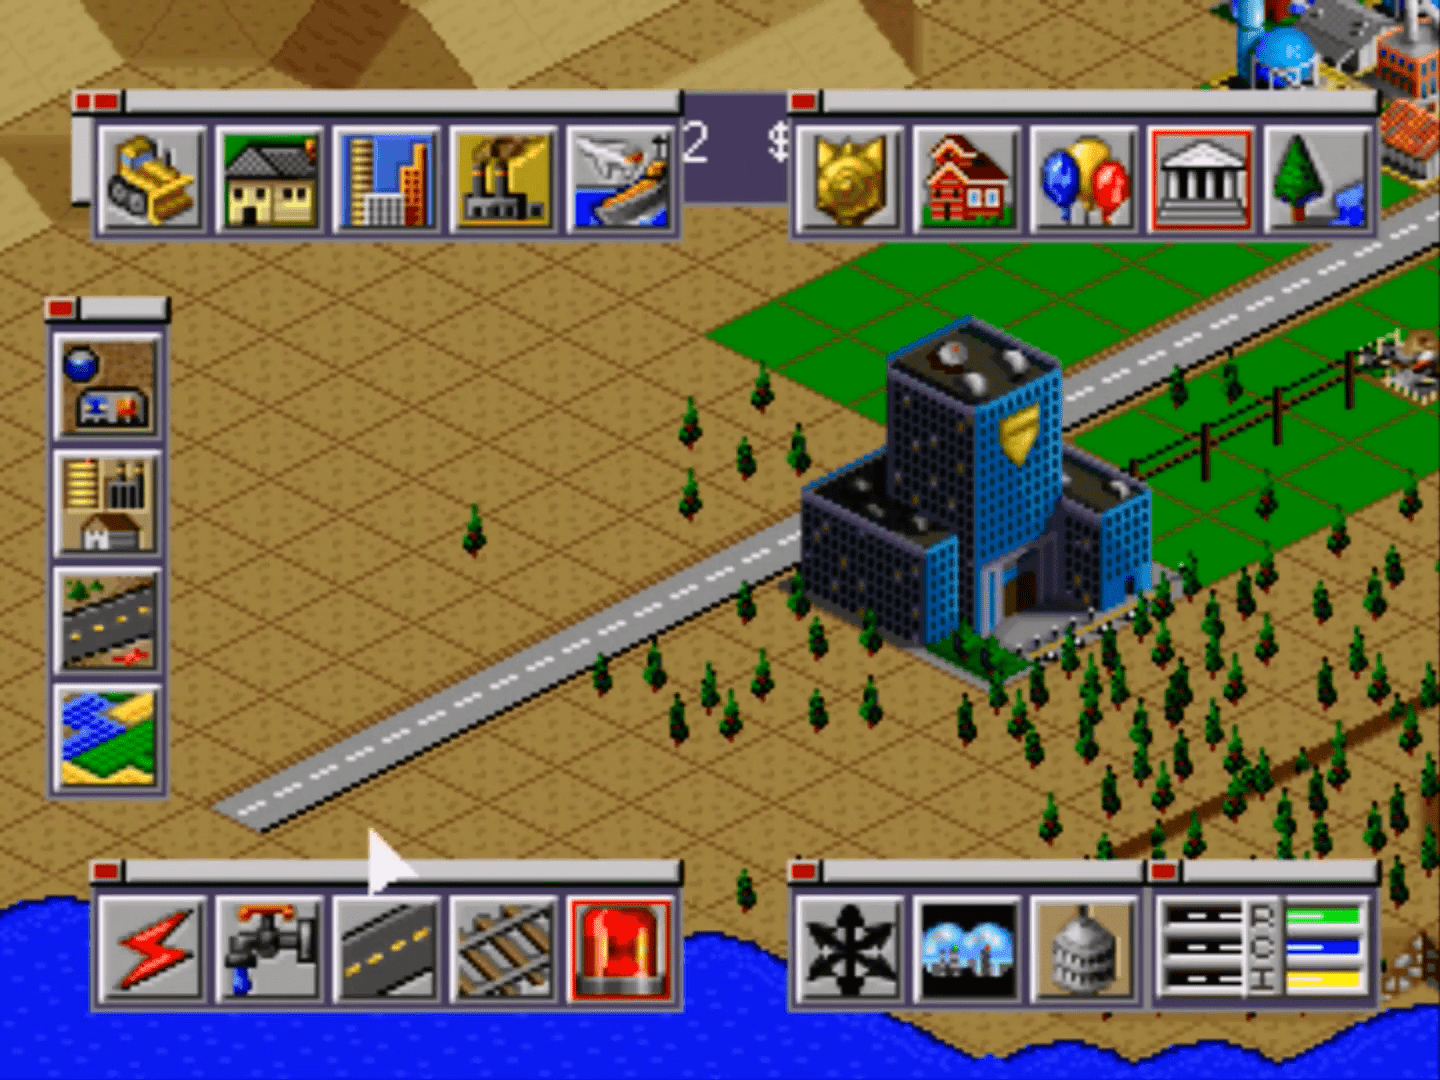 play simcity 2000 online free